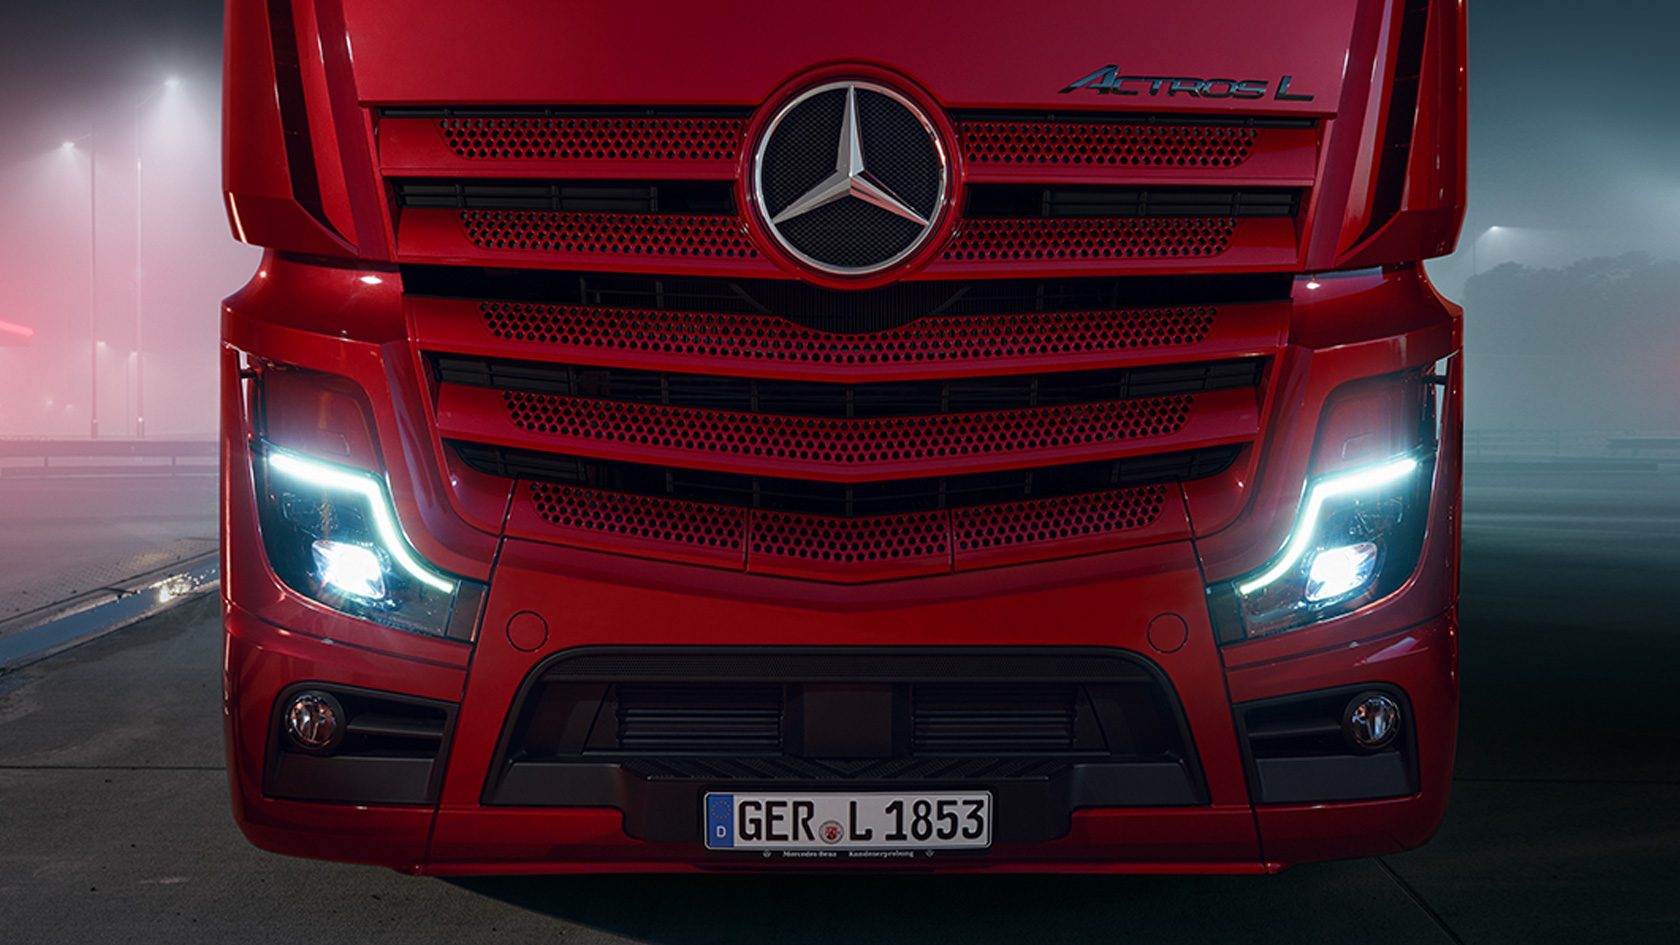 https://www.mercedes-benz-trucks.com/content/dam/mbo/markets/hq_HQ/models/actros-l/other-facts/accessories/images/teaser/teaser-accessories.jpg